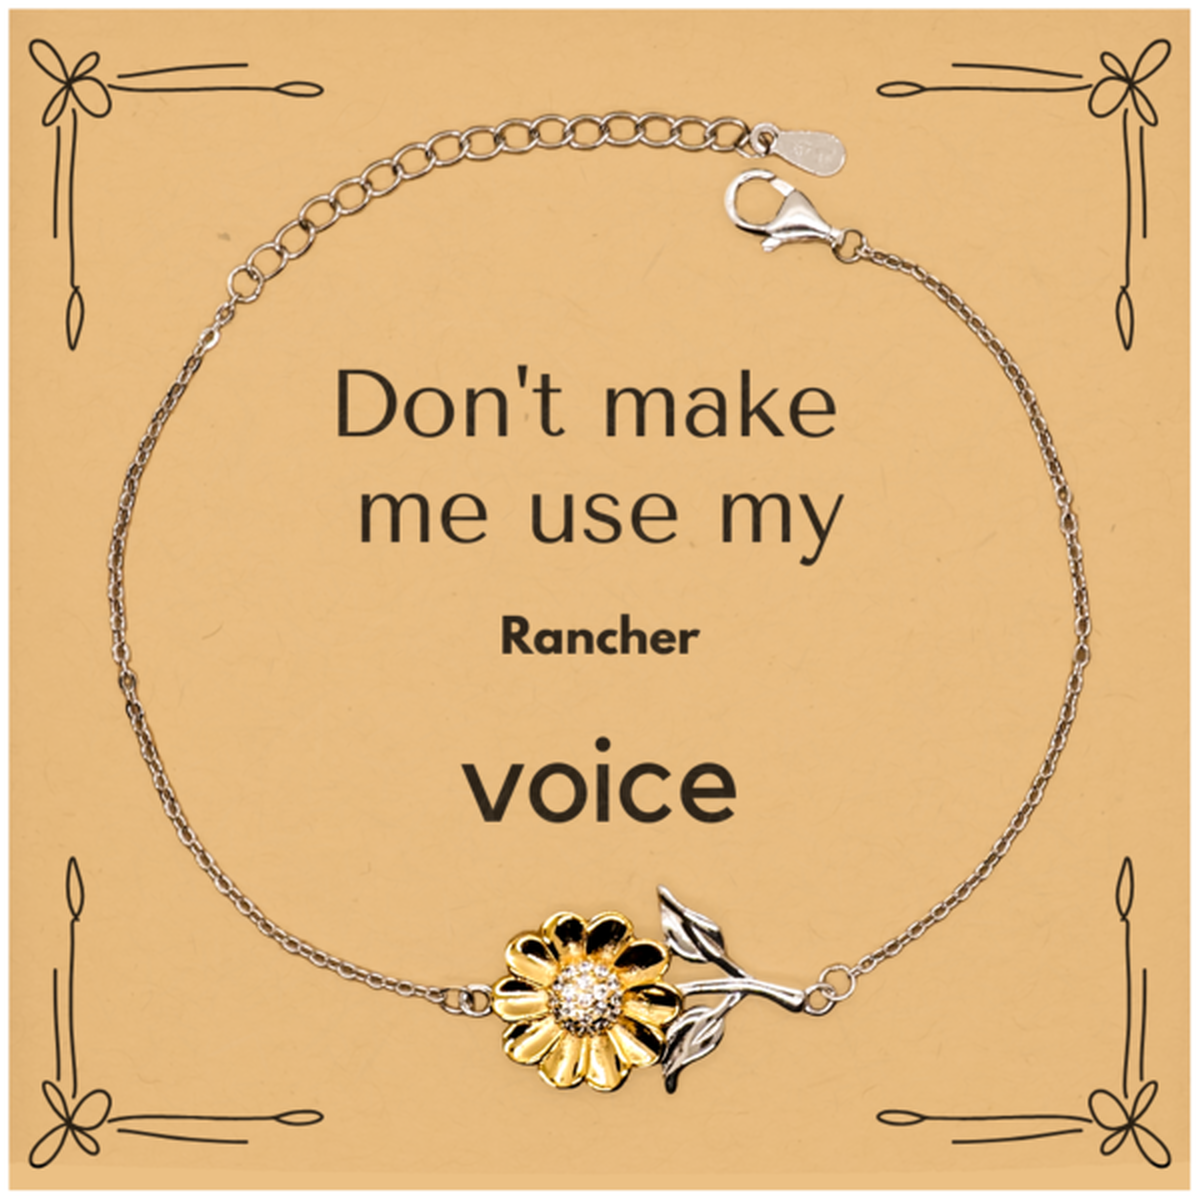 Don't make me use my Rancher voice, Sarcasm Rancher Card Gifts, Christmas Rancher Sunflower Bracelet Birthday Unique Gifts For Rancher Coworkers, Men, Women, Colleague, Friends